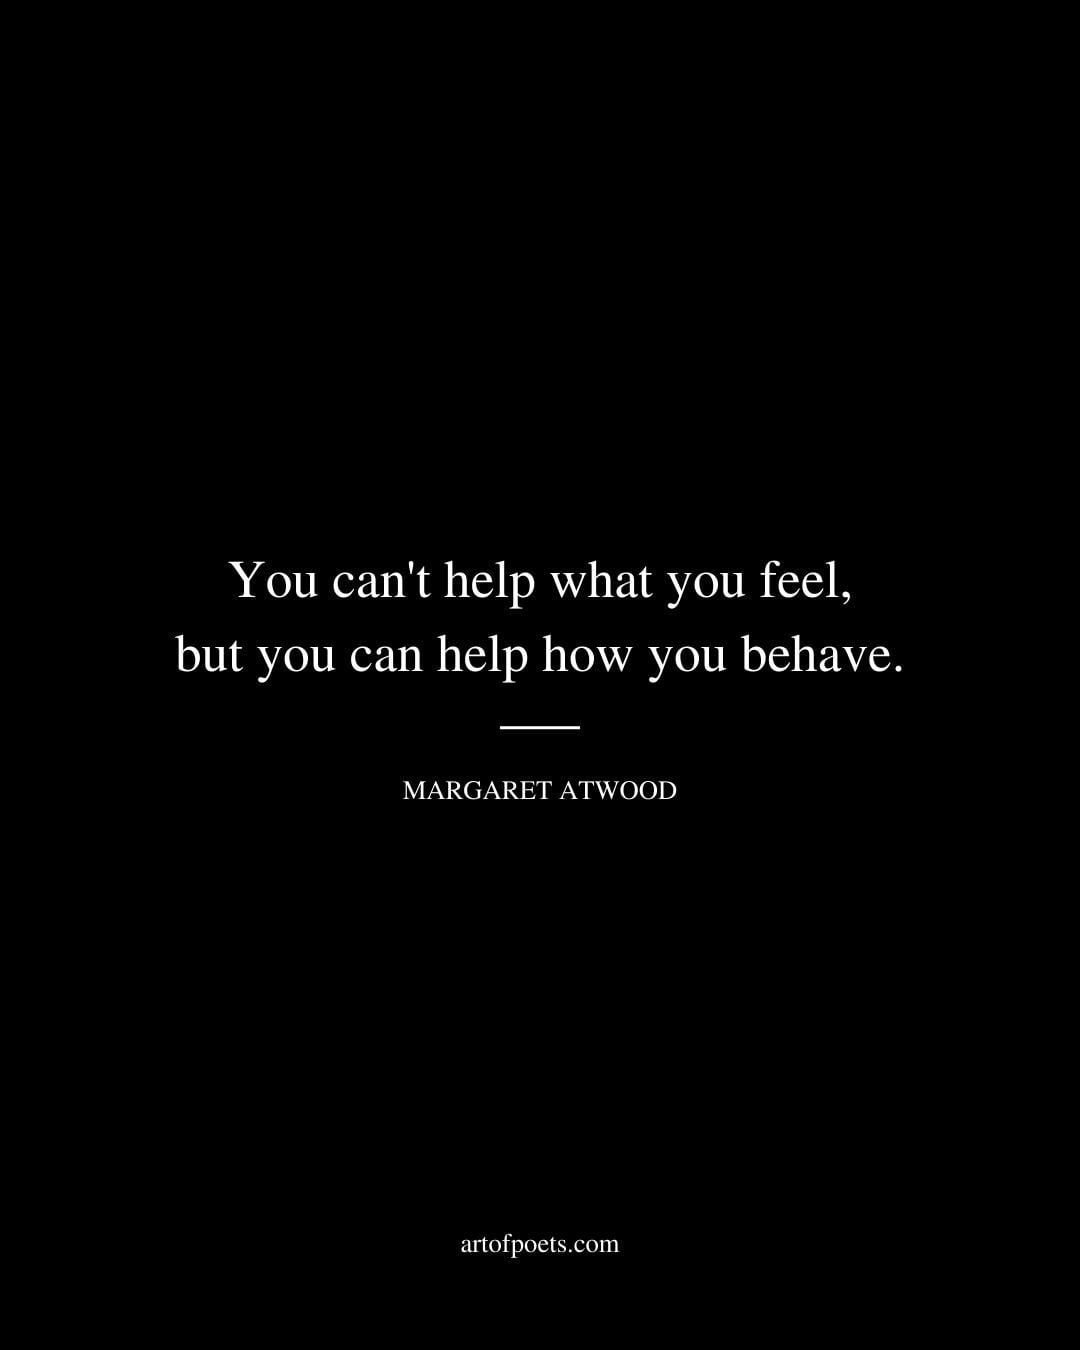 You cant help what you feel but you can help how you behave. Margaret Atwood